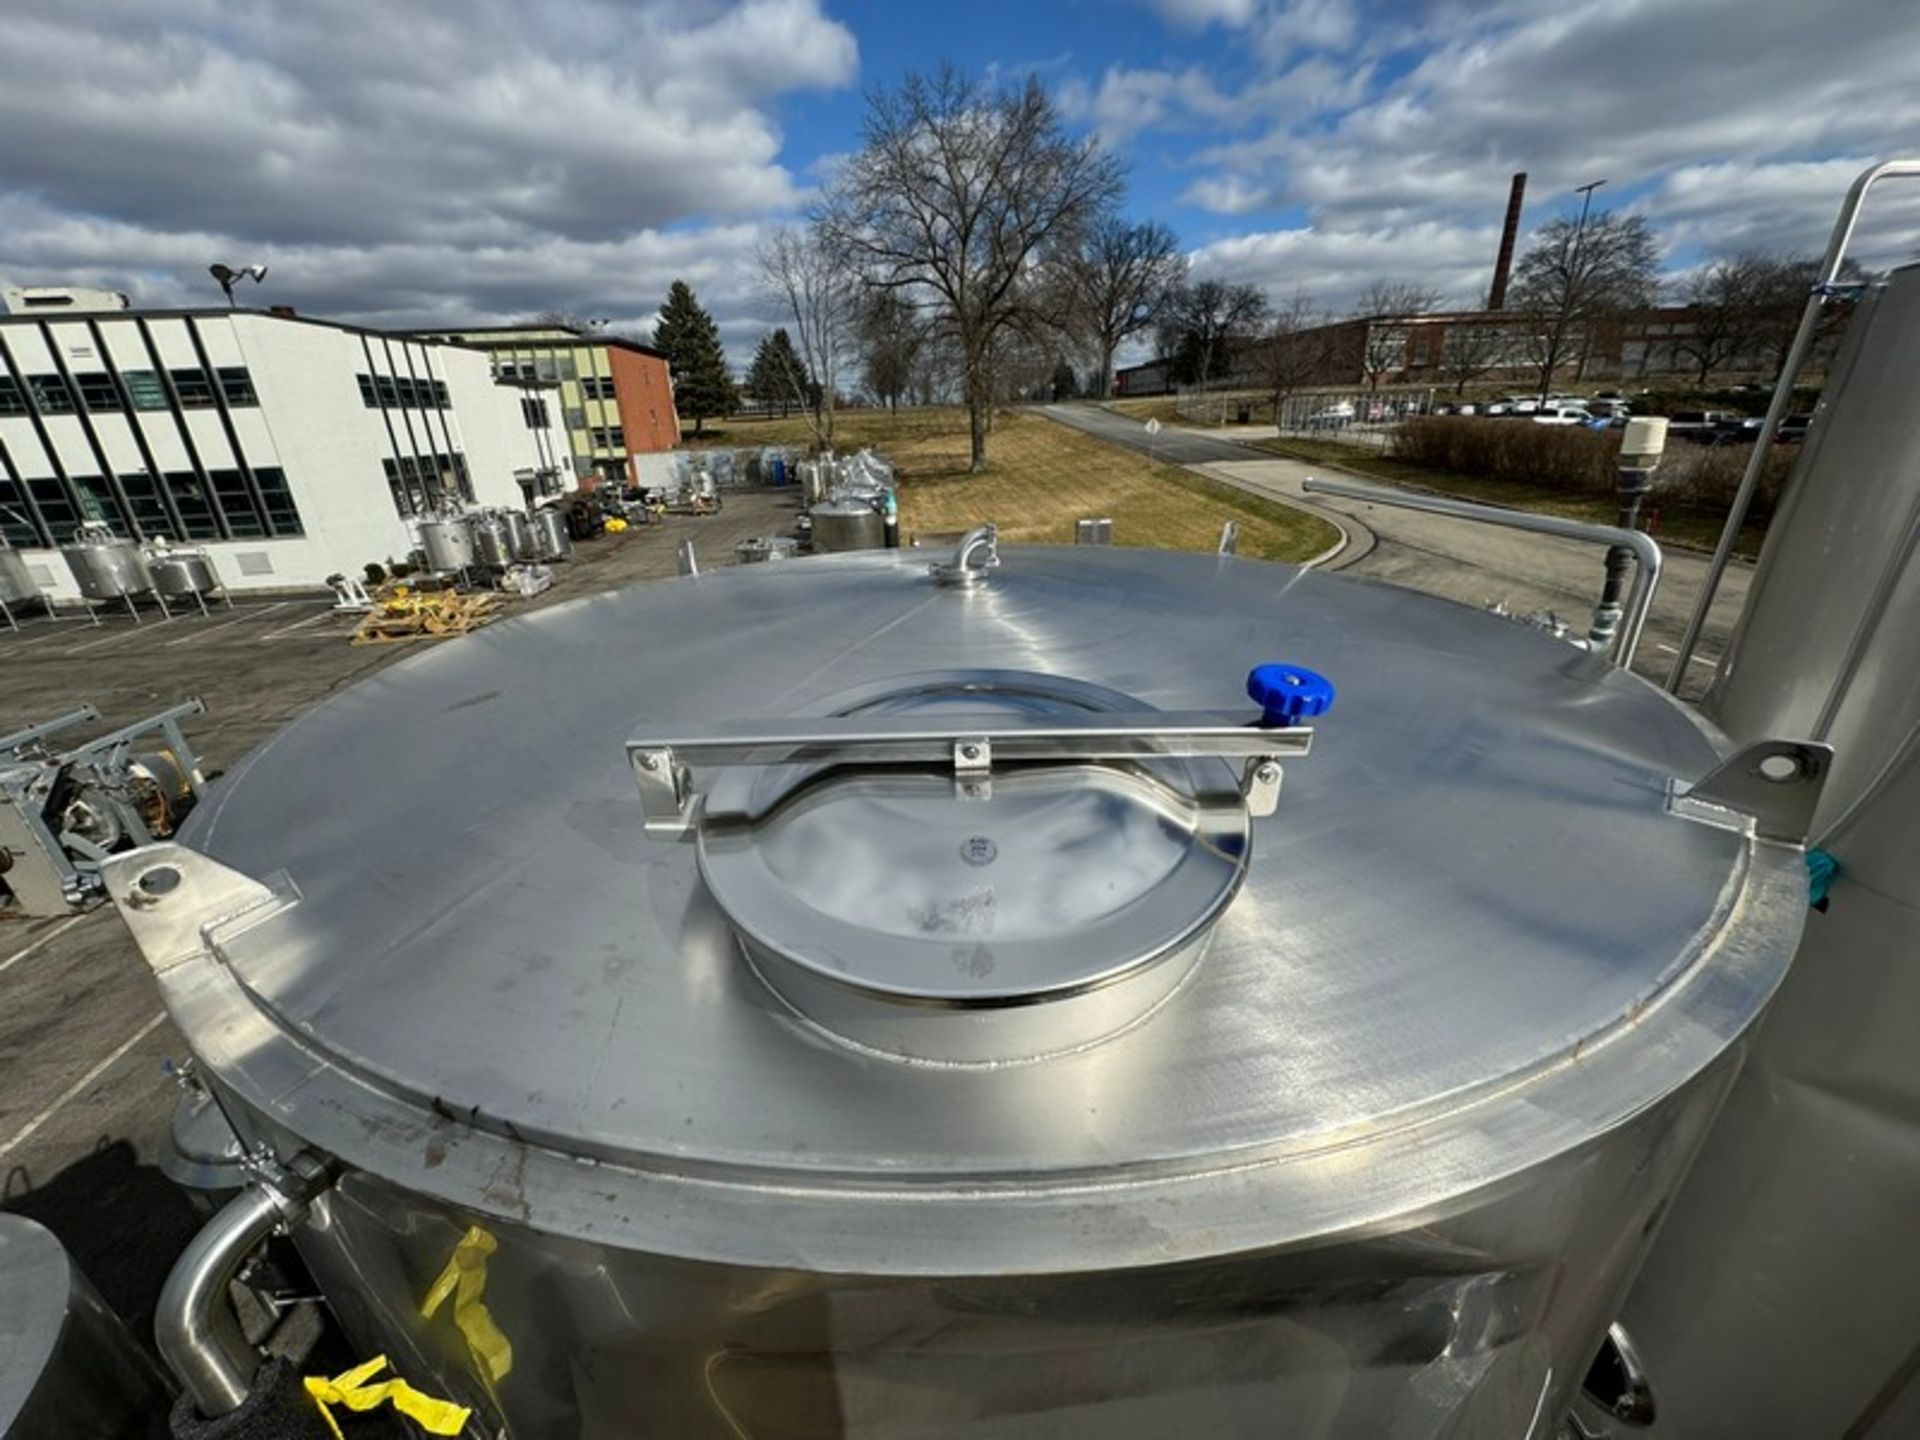 2012 Specific Mechanical Systems 200 BBL Capacity S/S Cold Liquor Tank, S/N RMP-136-12-300, with S/S - Image 8 of 11